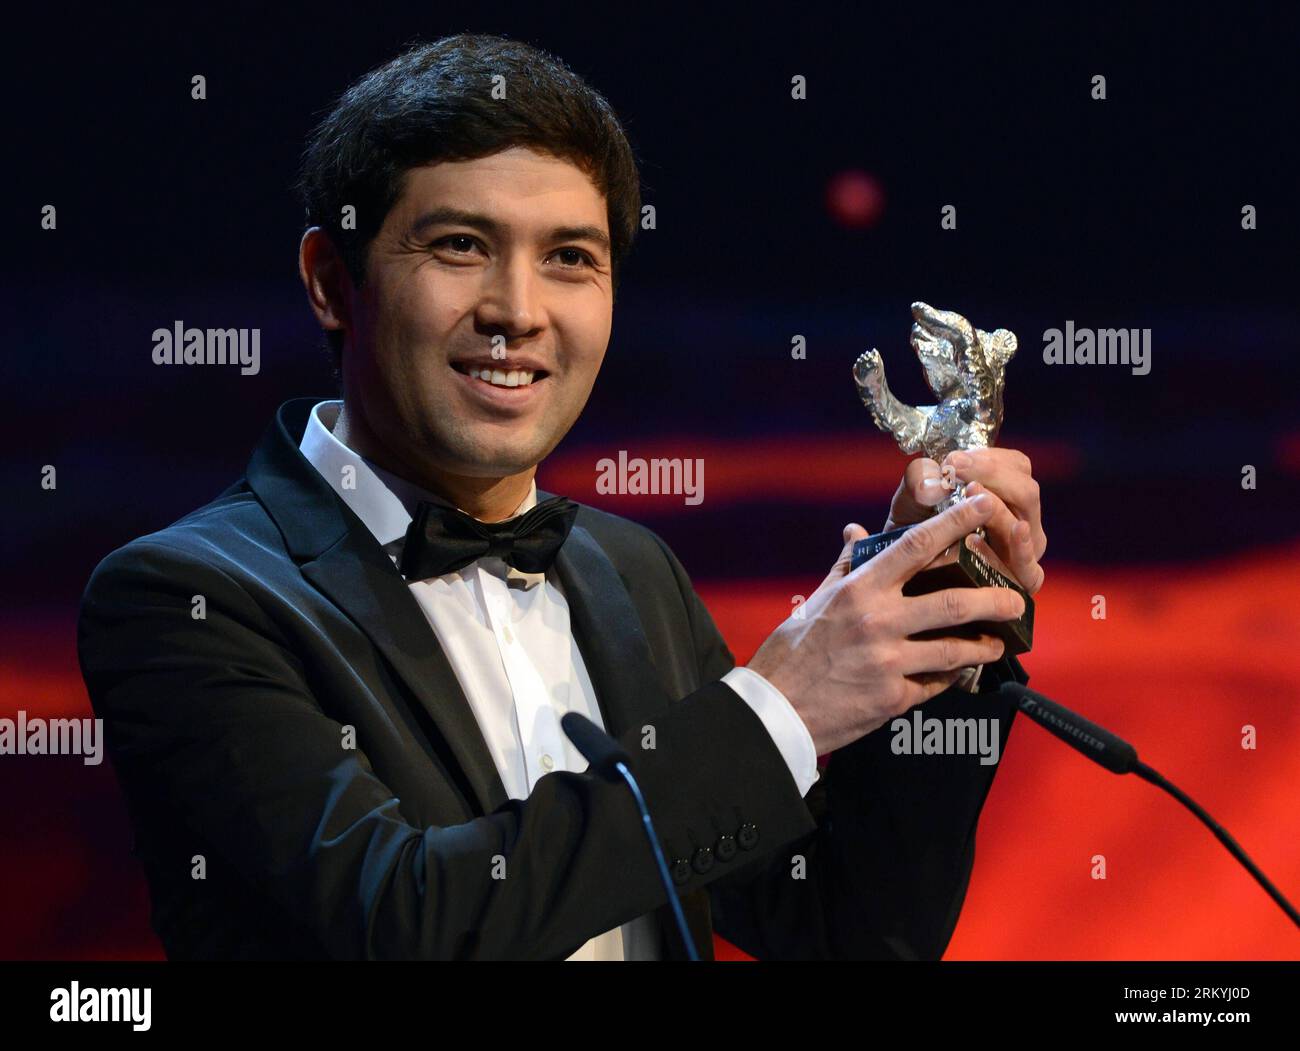 Bildnummer: 59228988  Datum: 16.02.2013  Copyright: imago/Xinhua Kazakh cameraman Zhambakiyev poses with Silver Bear for an Outstanding Artistic Contribution in film Uroki Garmonii (Harmony Lessons) during the awards ceremony at the 63rd Berlinale International Film Festival in Berlin, Feb. 16, 2013. (Xinhua/Ma Ning) GERMANY-BERLIN-FILM FESTIVAL-AWARDS PUBLICATIONxNOTxINxCHN Kultur Entertainment People Film 63. Internationale Filmfestspiele Berlinale Berlin Ehrung Ehrung Preisträger premiumd x1x xds 2013 quer     59228988 Date 16 02 2013 Copyright Imago XINHUA  cameraman  Poses With Silver Bea Stock Photo